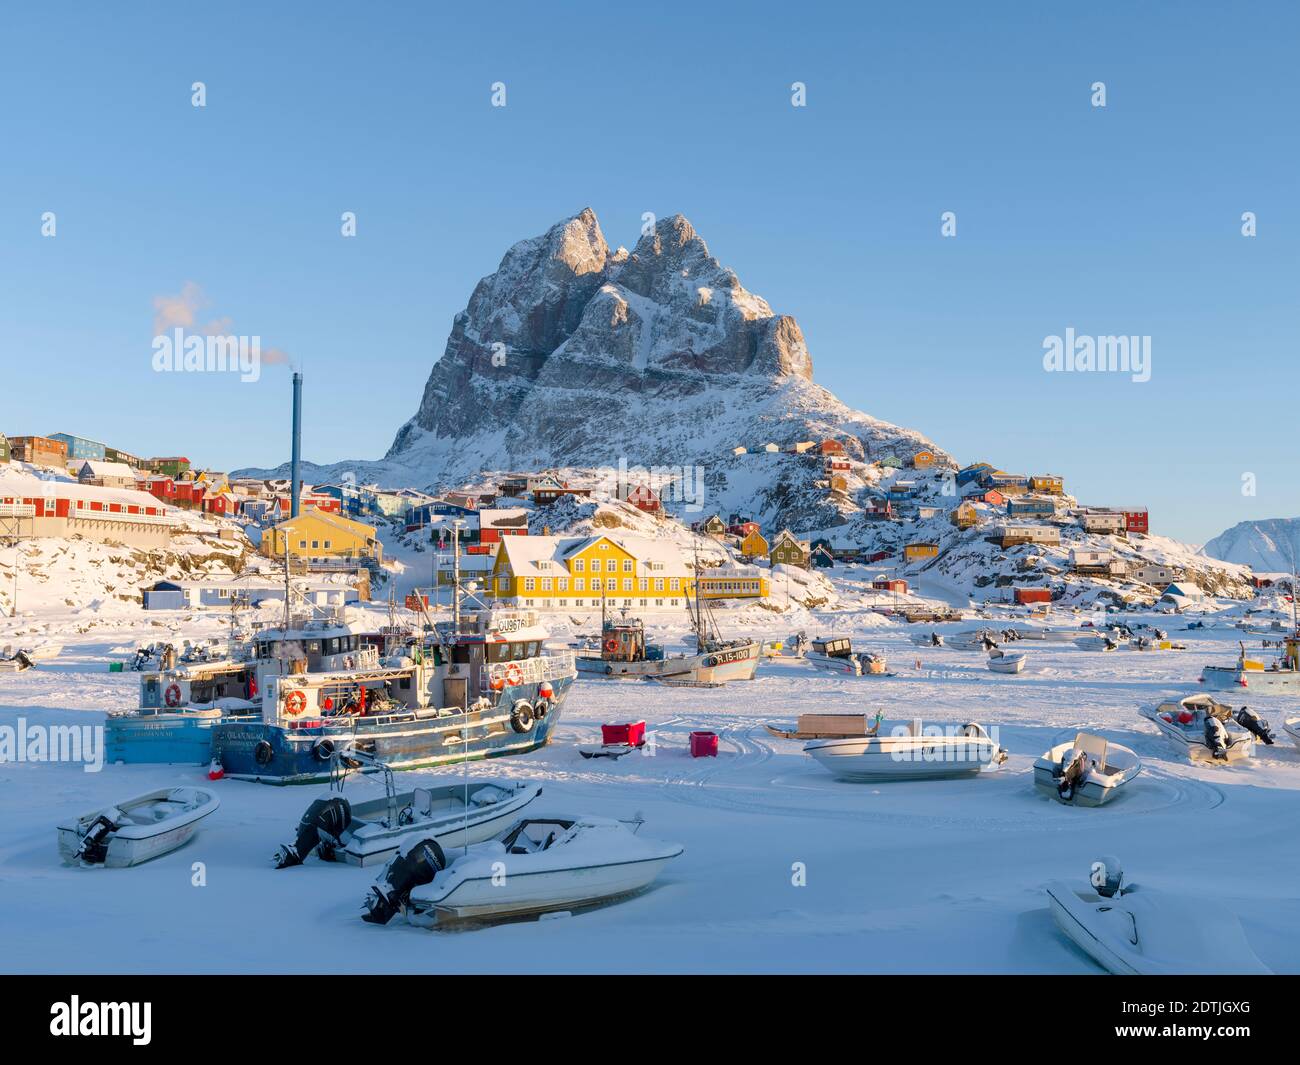 Town Uummannaq during winter in northern Greenland. Ships in the frozen harbour. America, North America, Denmark, Greenland Stock Photo